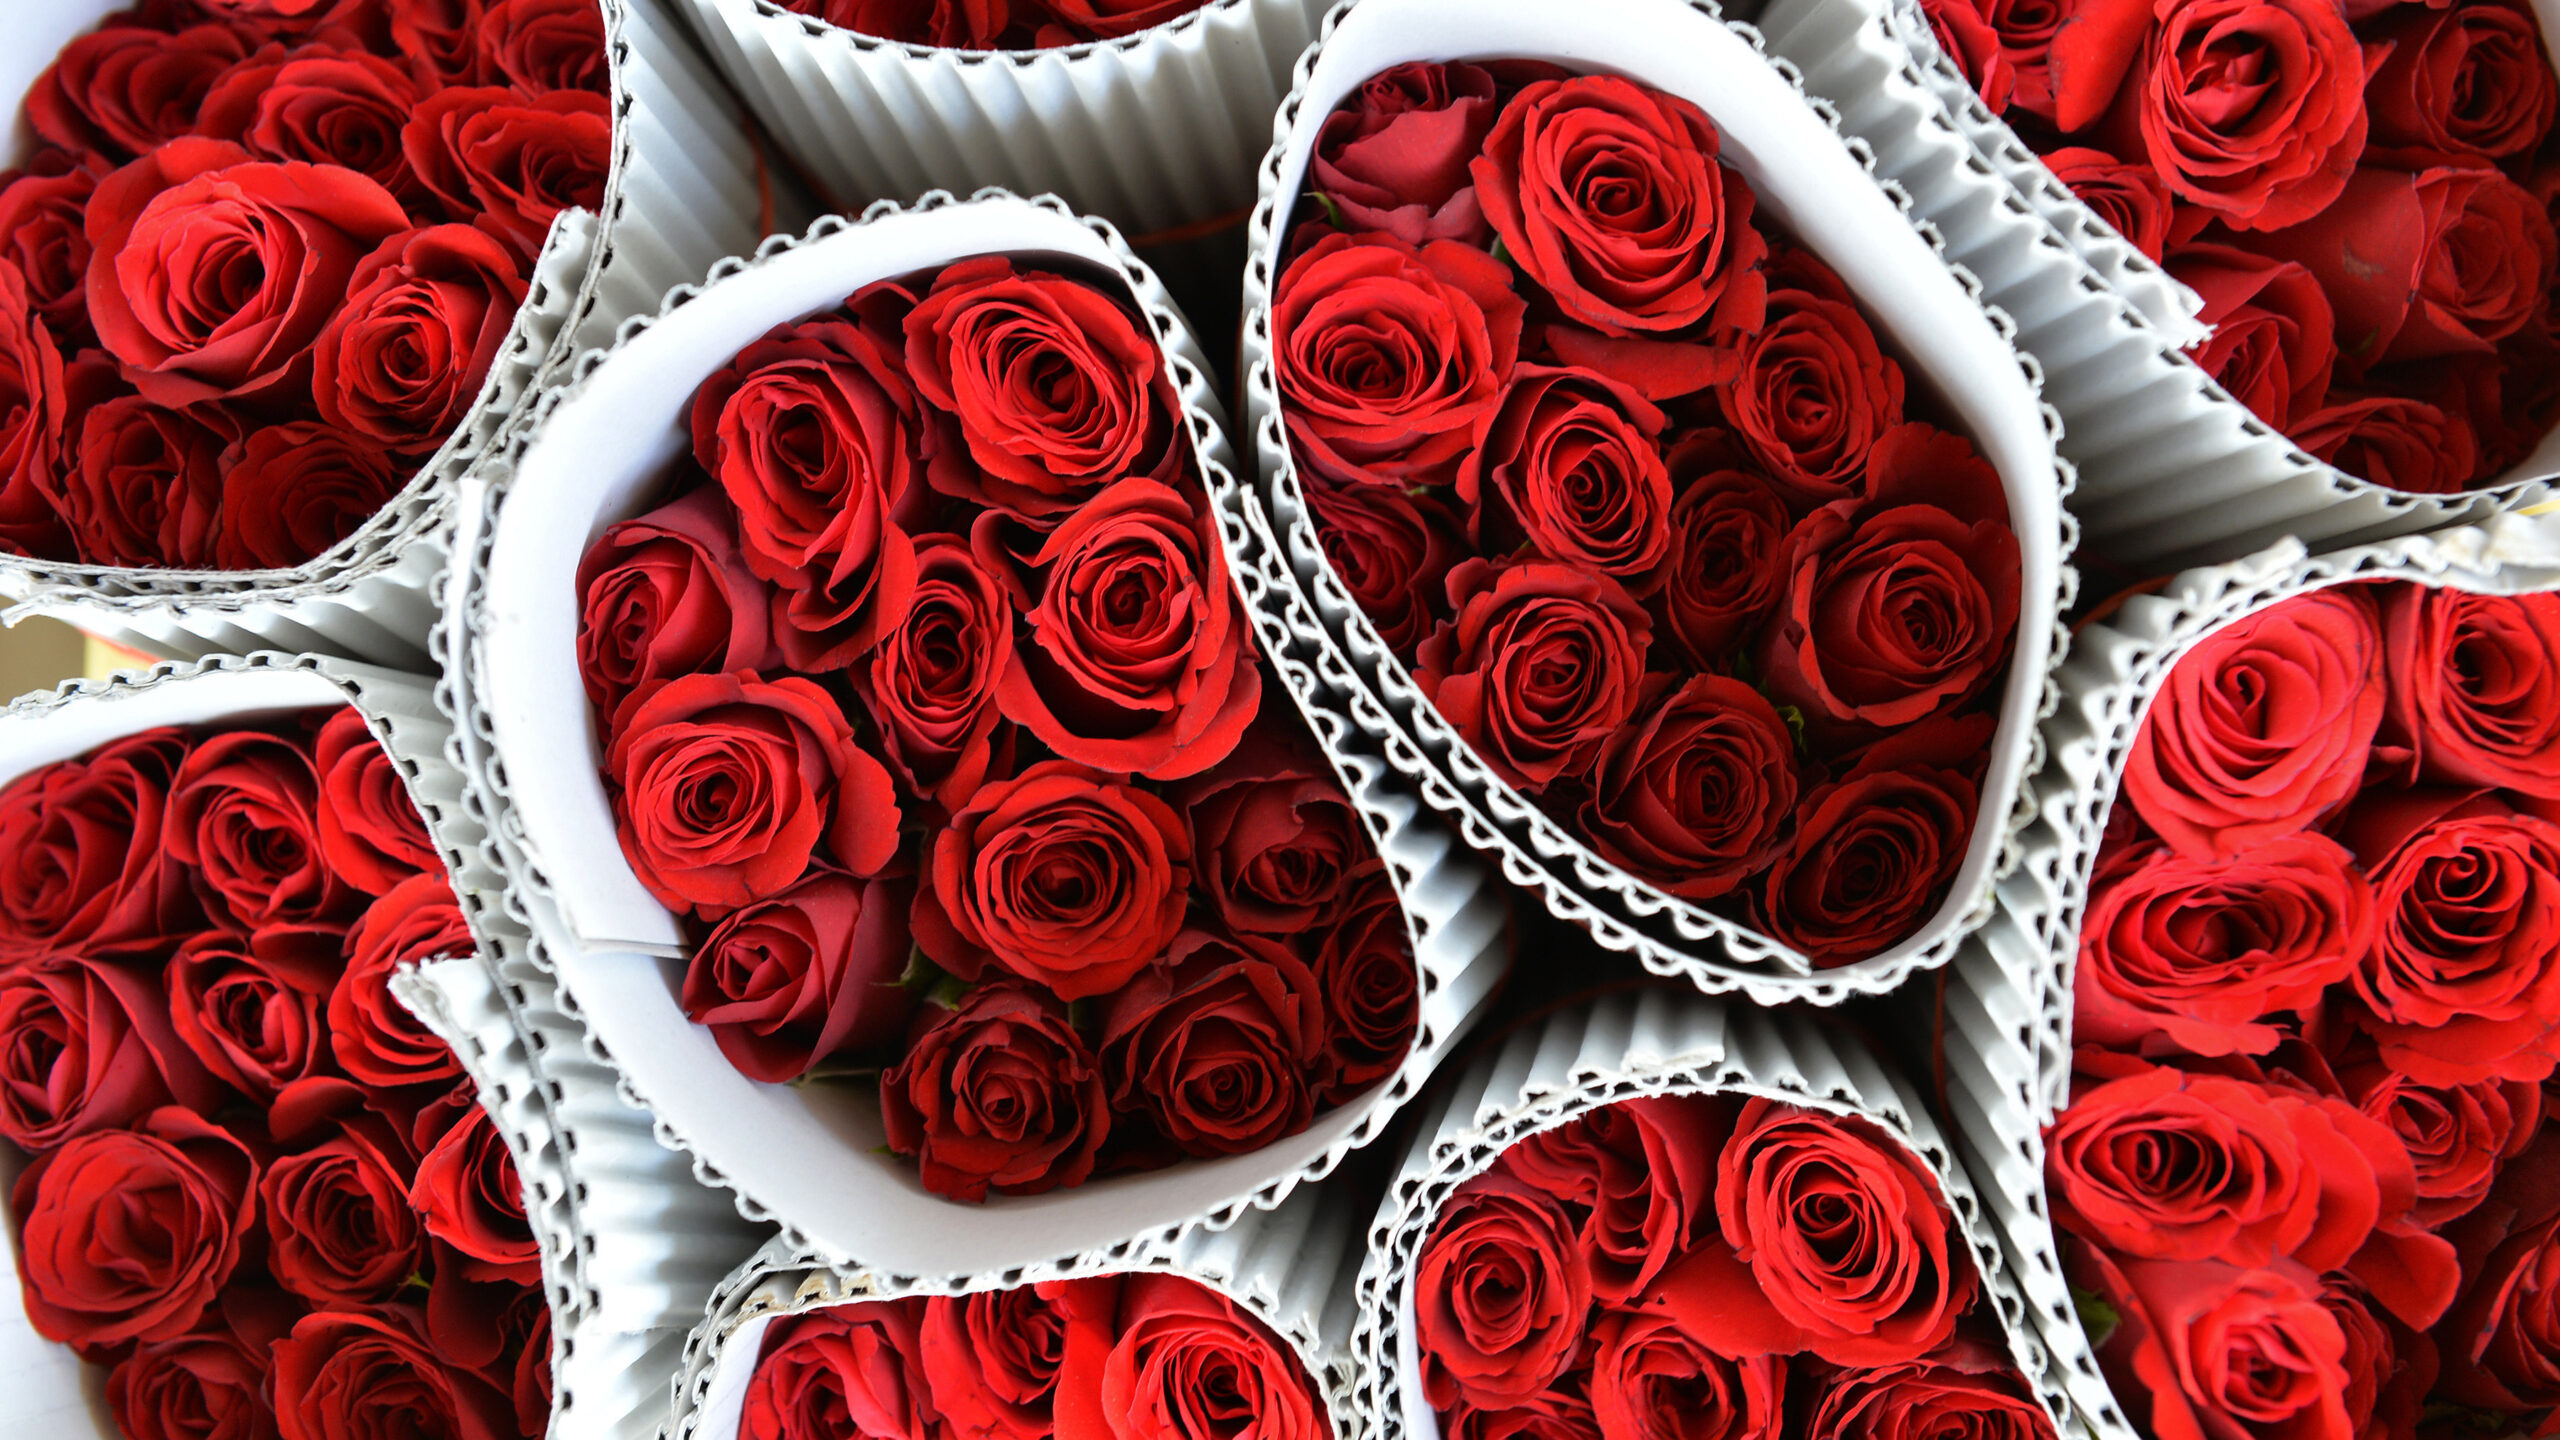 bouquets of red roses